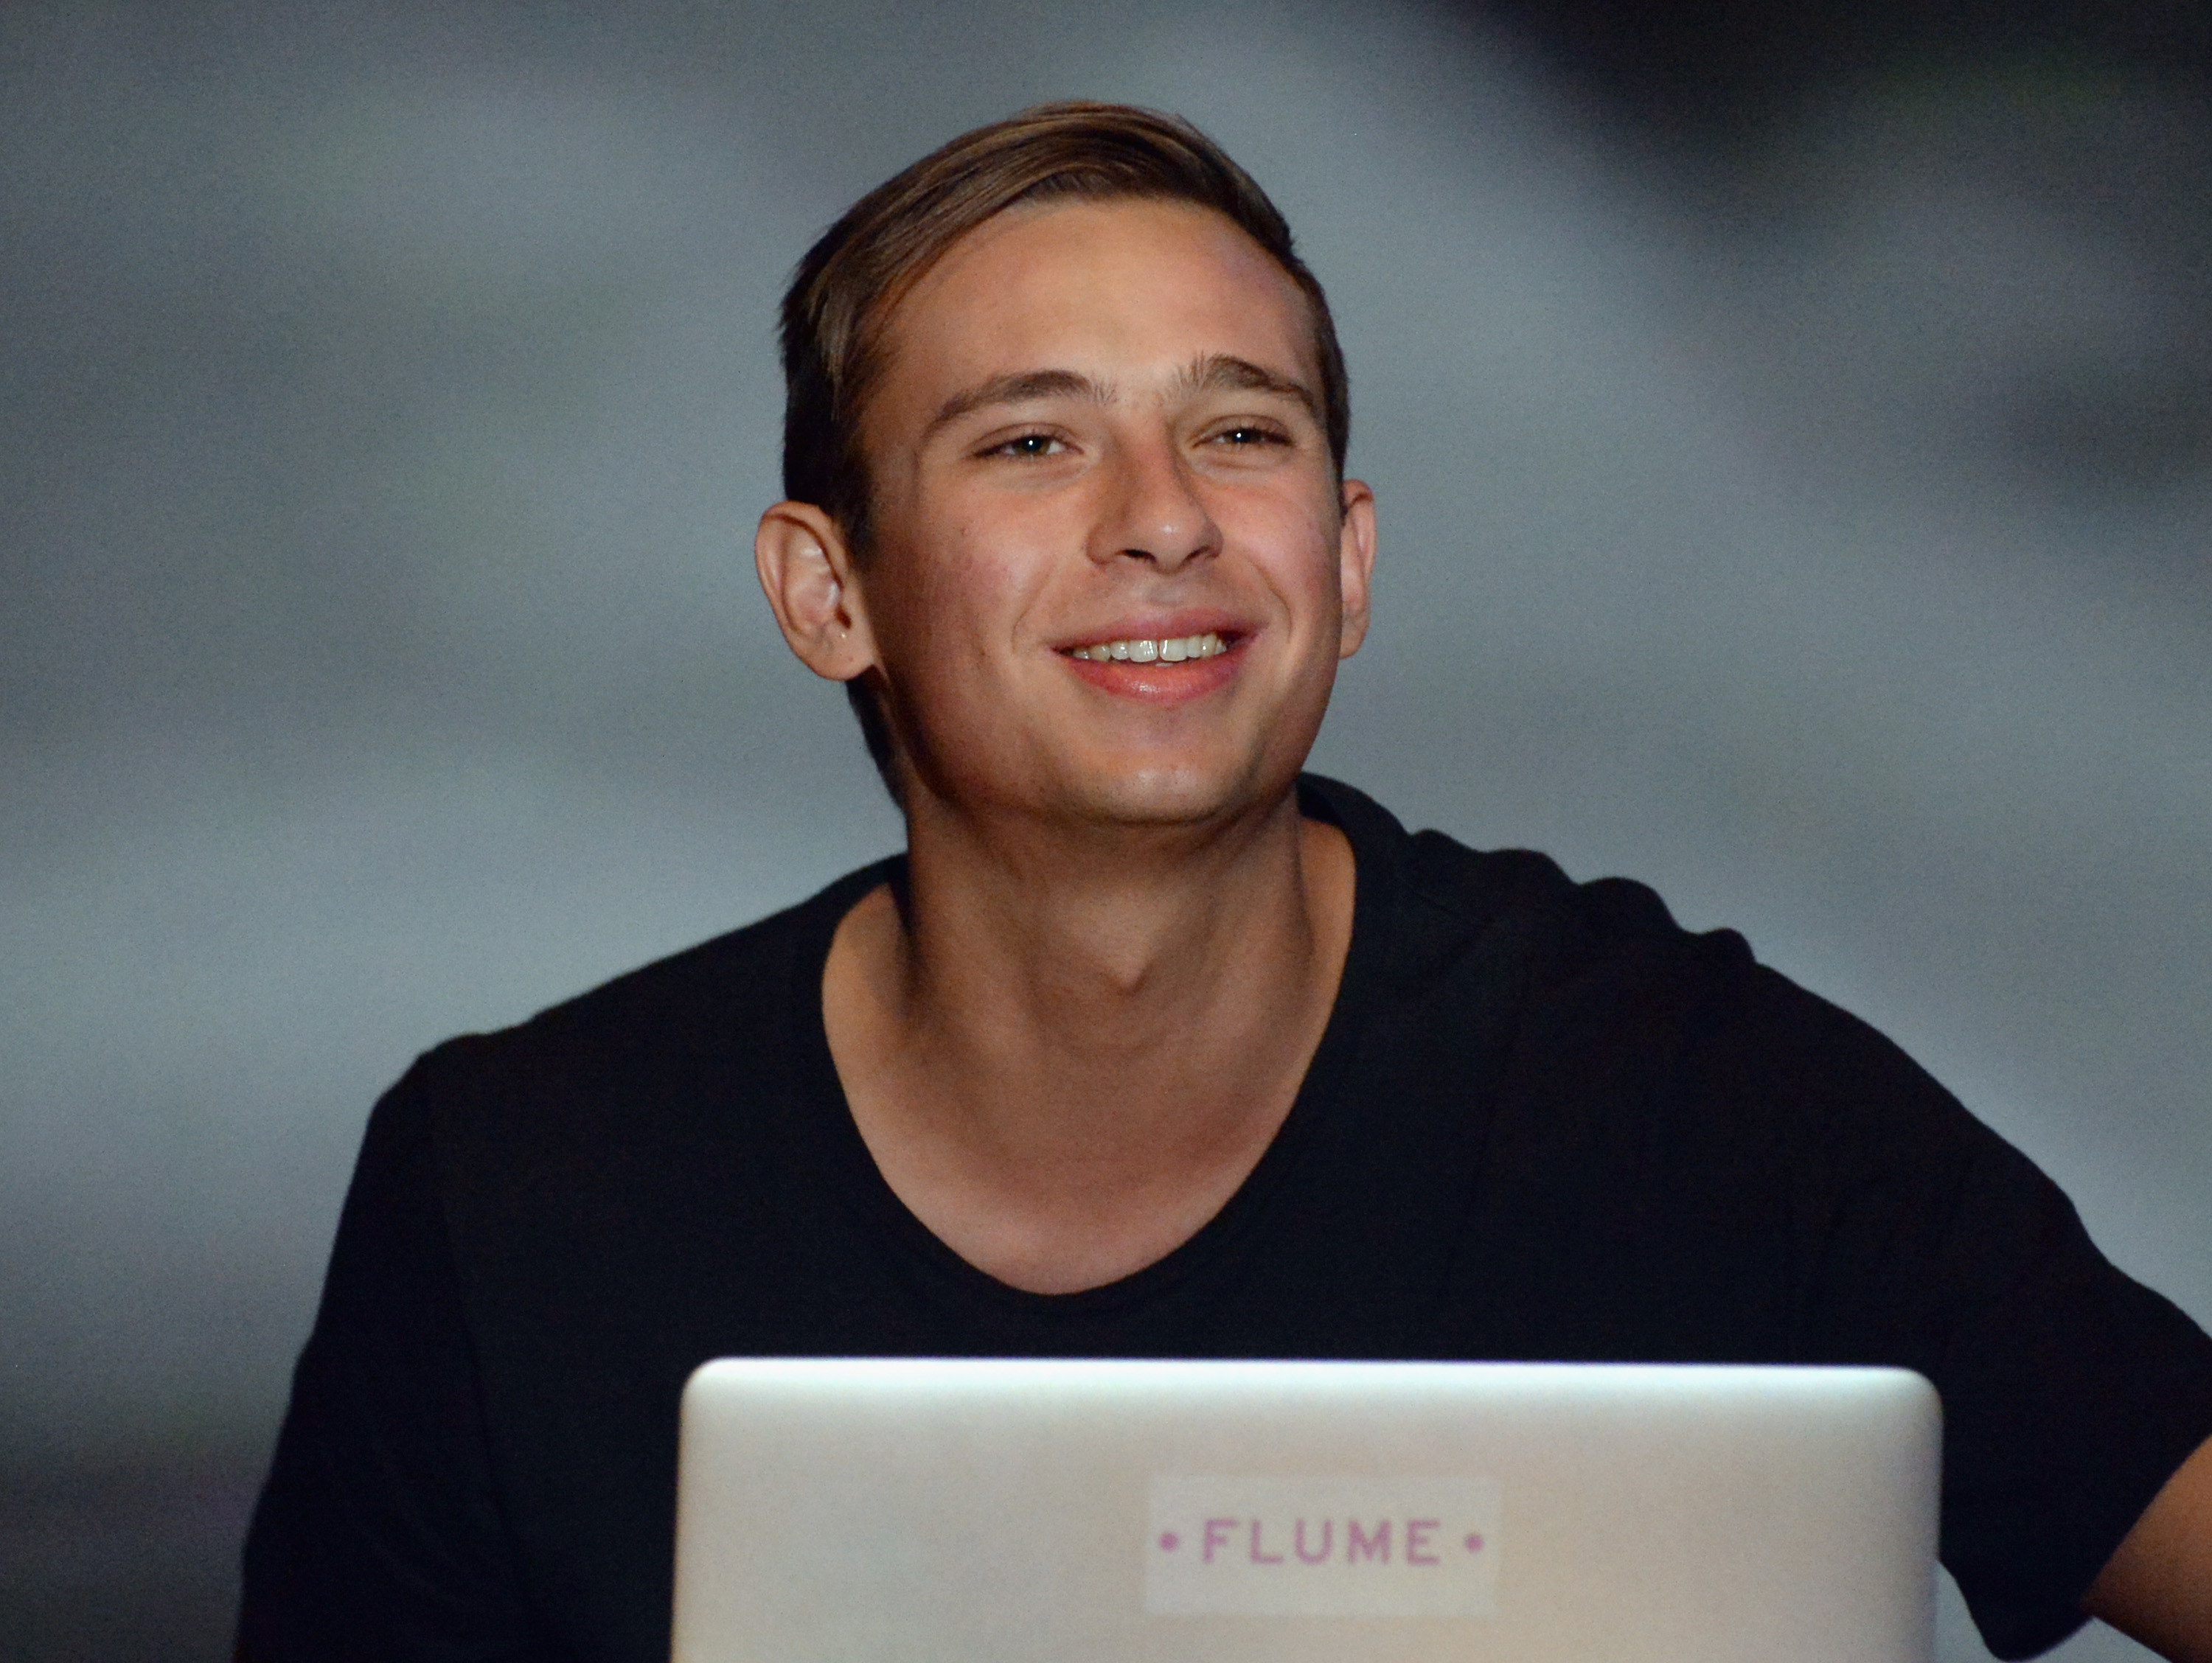 Flume when he was younger